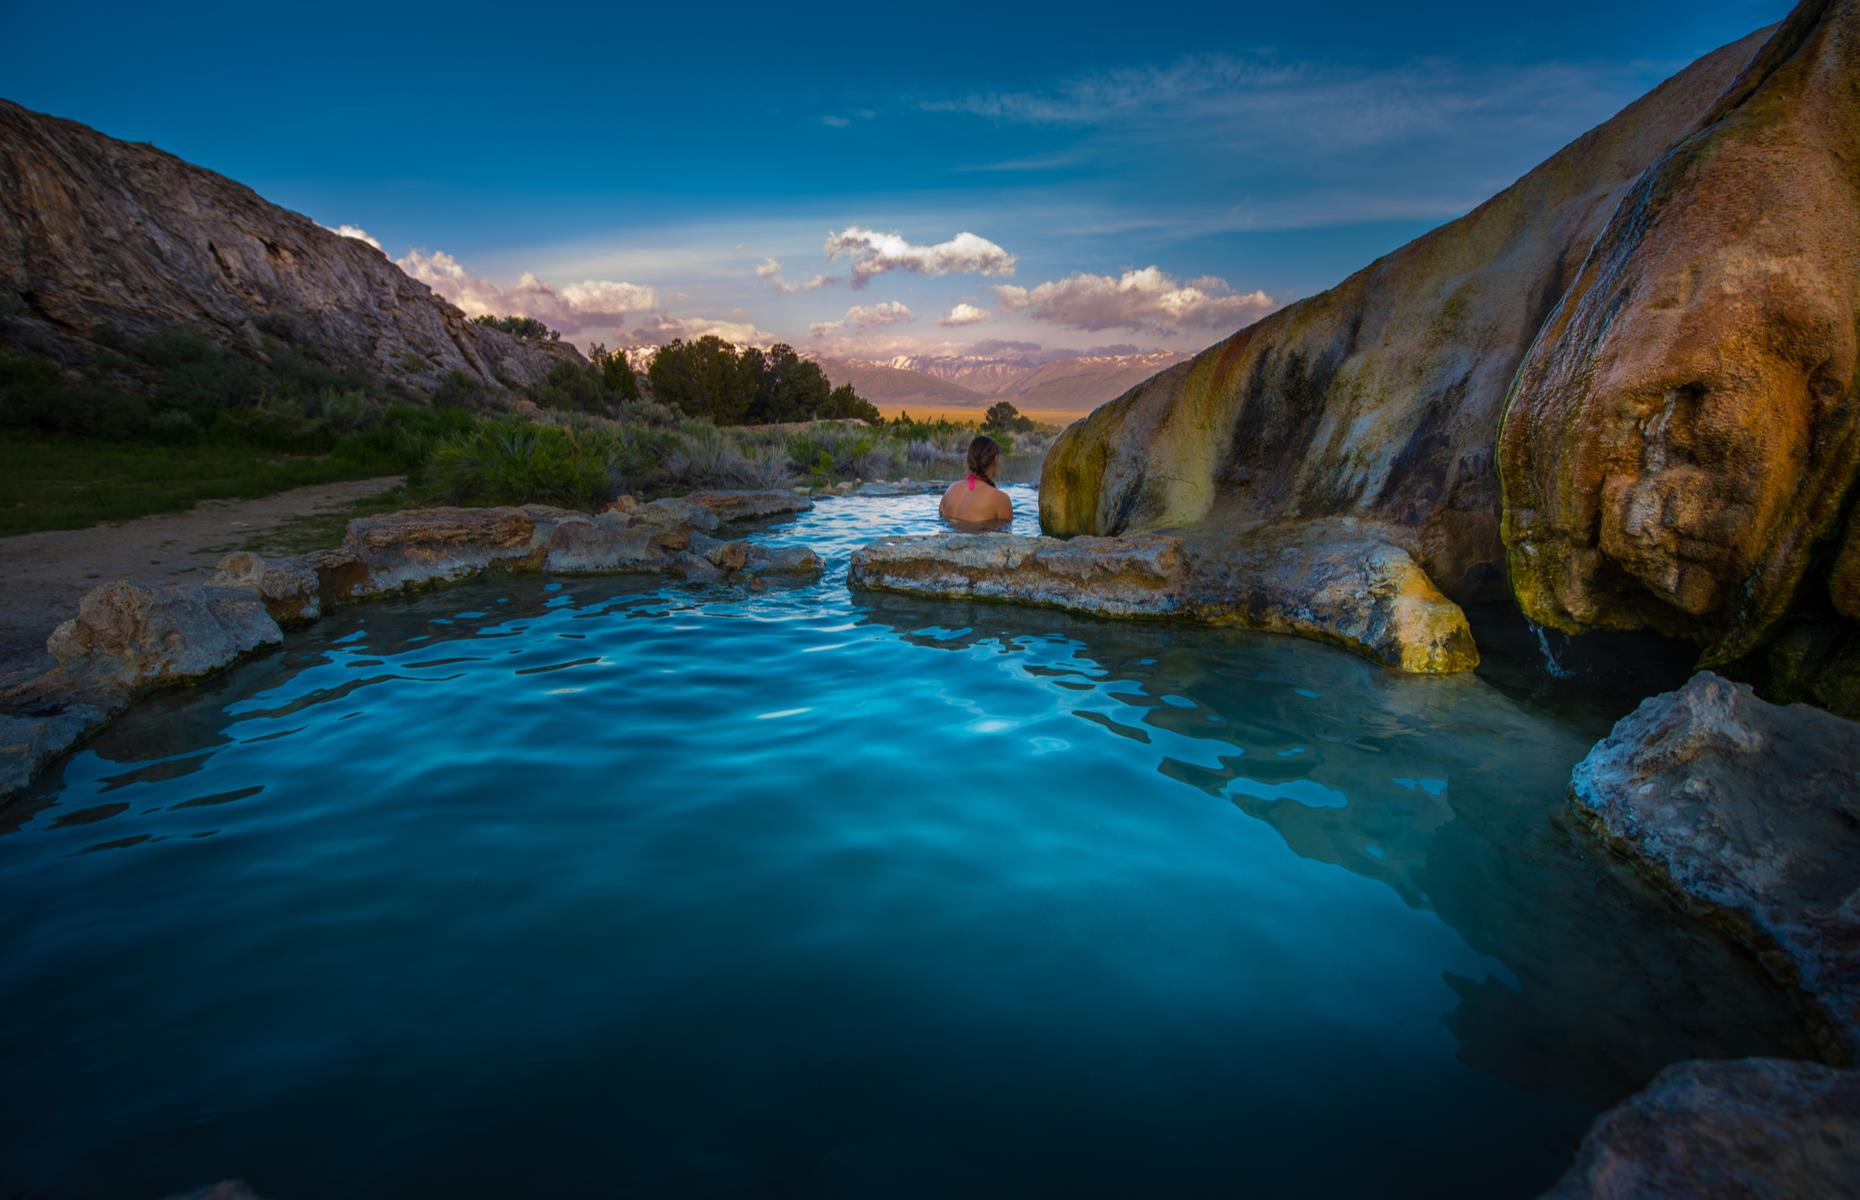 <p>These shallow thermal pools offer incredible sunsets views over California’s Eastern Sierra. Lined with silky soft, mineral-rich clay, the piping hot water from the source is cooled to a glorious 39°C (102°F) as it flows over the rocks to form these pools. You’ll find Travertine Hot Springs a five-minute drive from Bridgeport and, be warned, clothing is optional. </p>